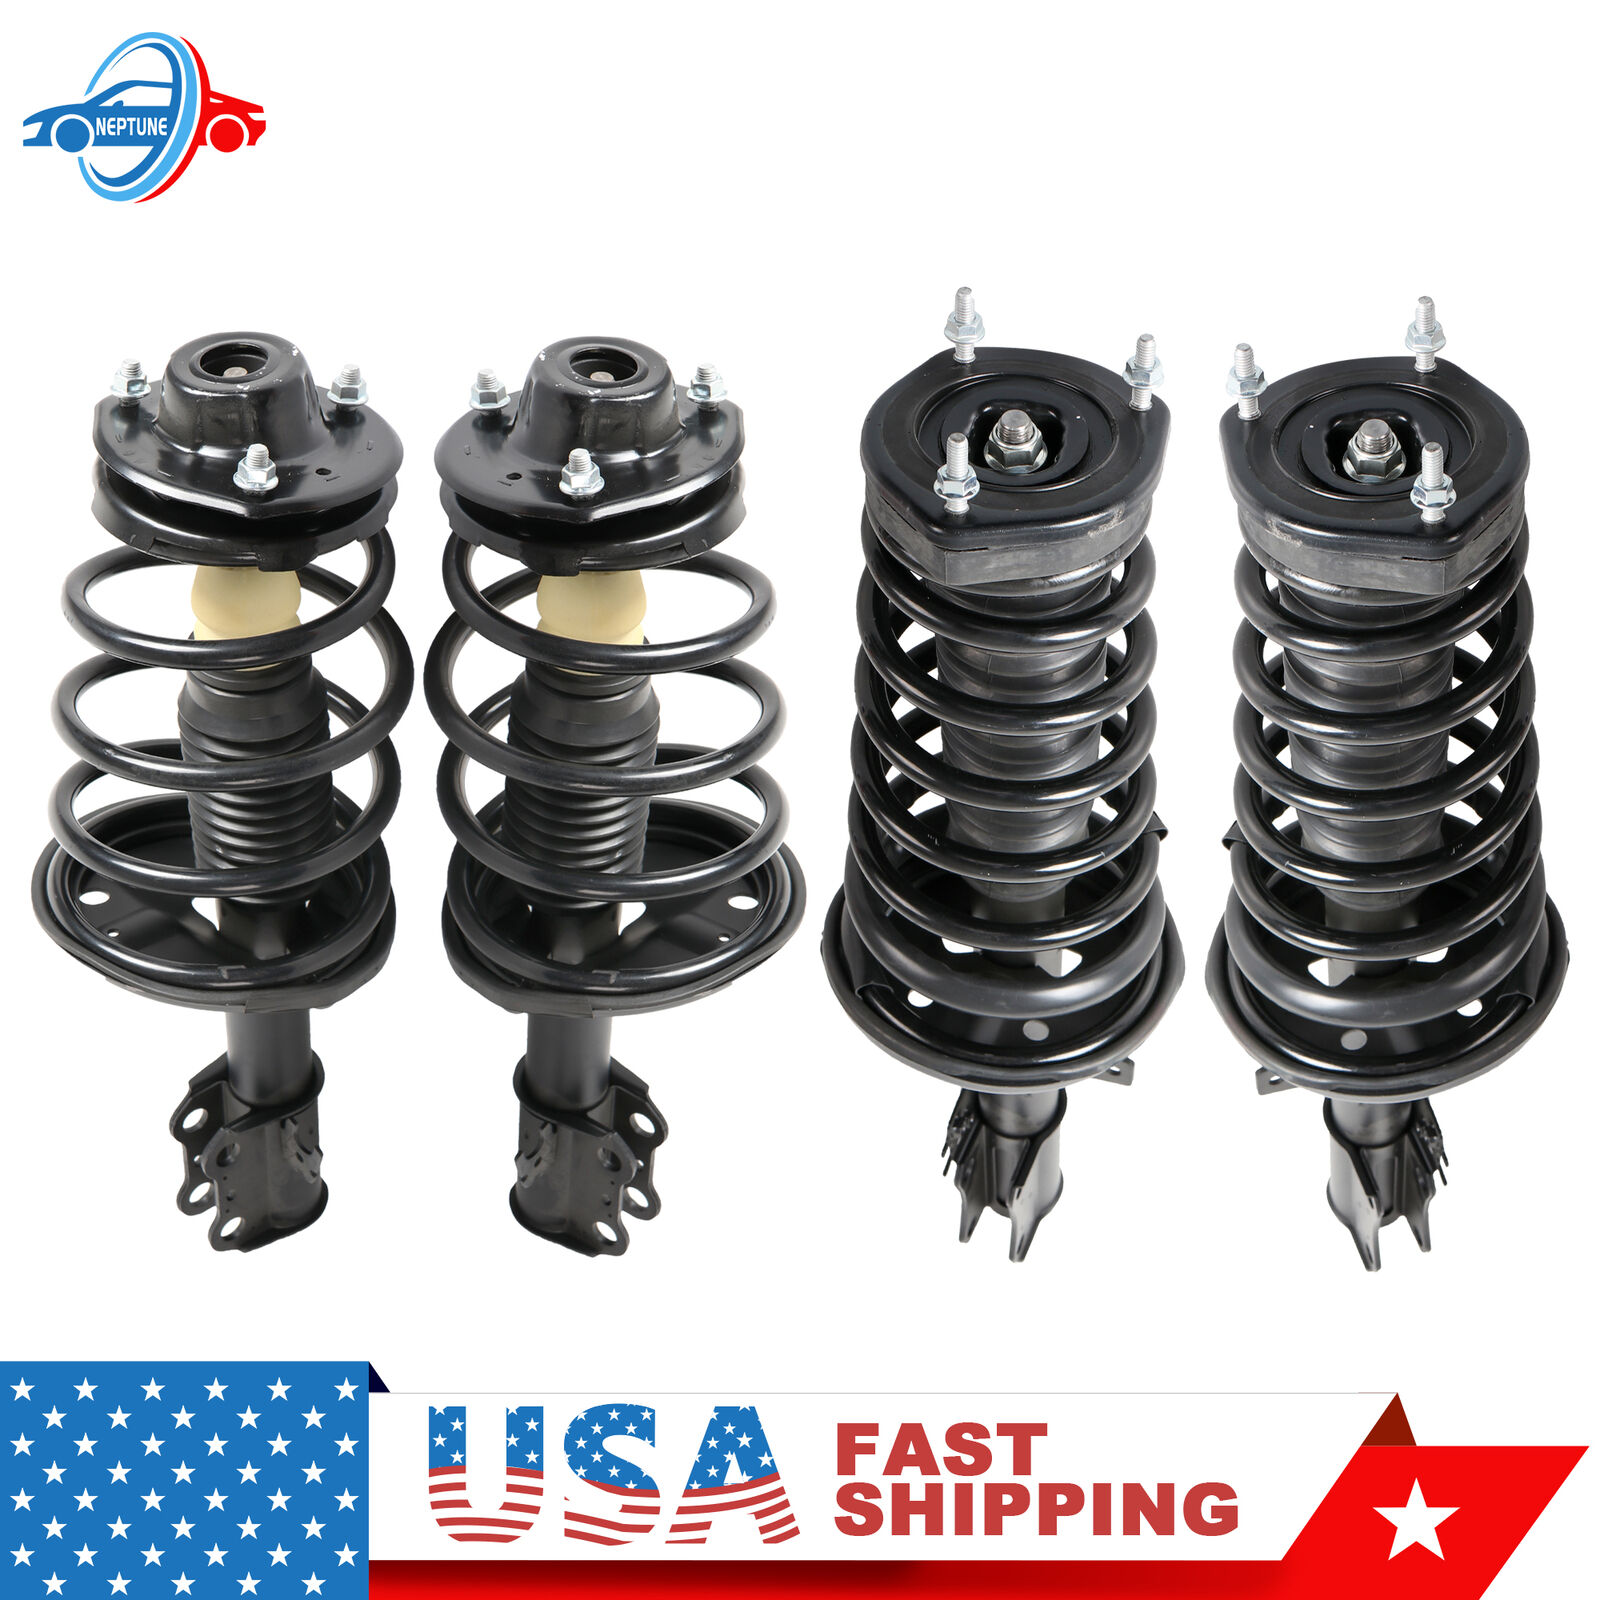 4PCS Complete Struts Shock Absorbers For 97-01 Toyota Camry Avalon 99-03 Solara